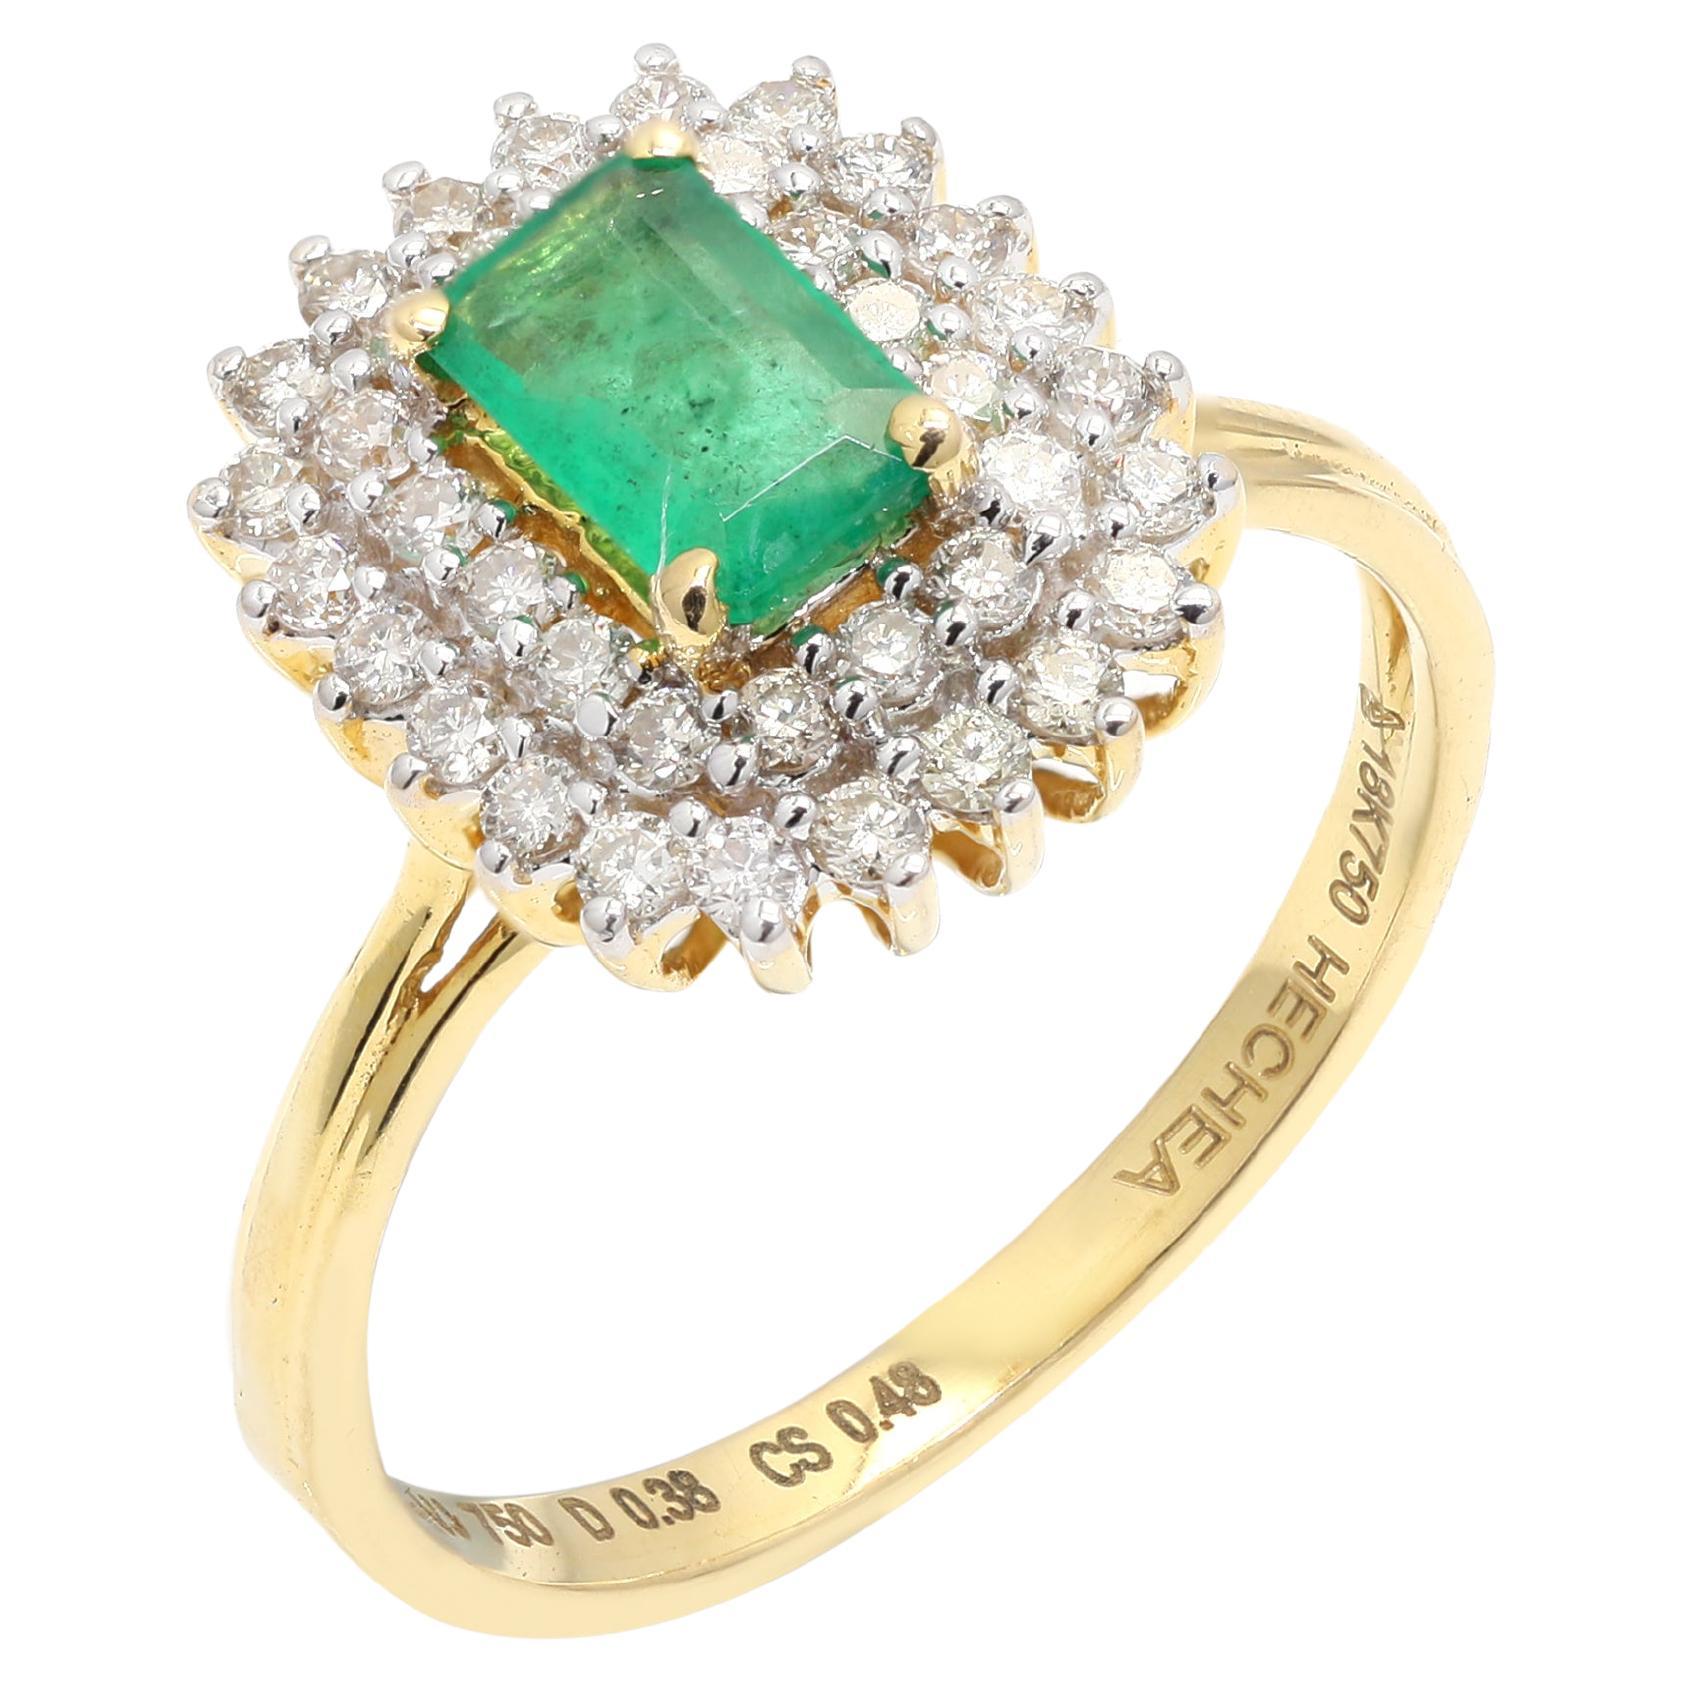 For Sale:  Bespoke Octagon Cut Emerald Amidst of Diamond Wedding Ring in 18k Yellow Gold